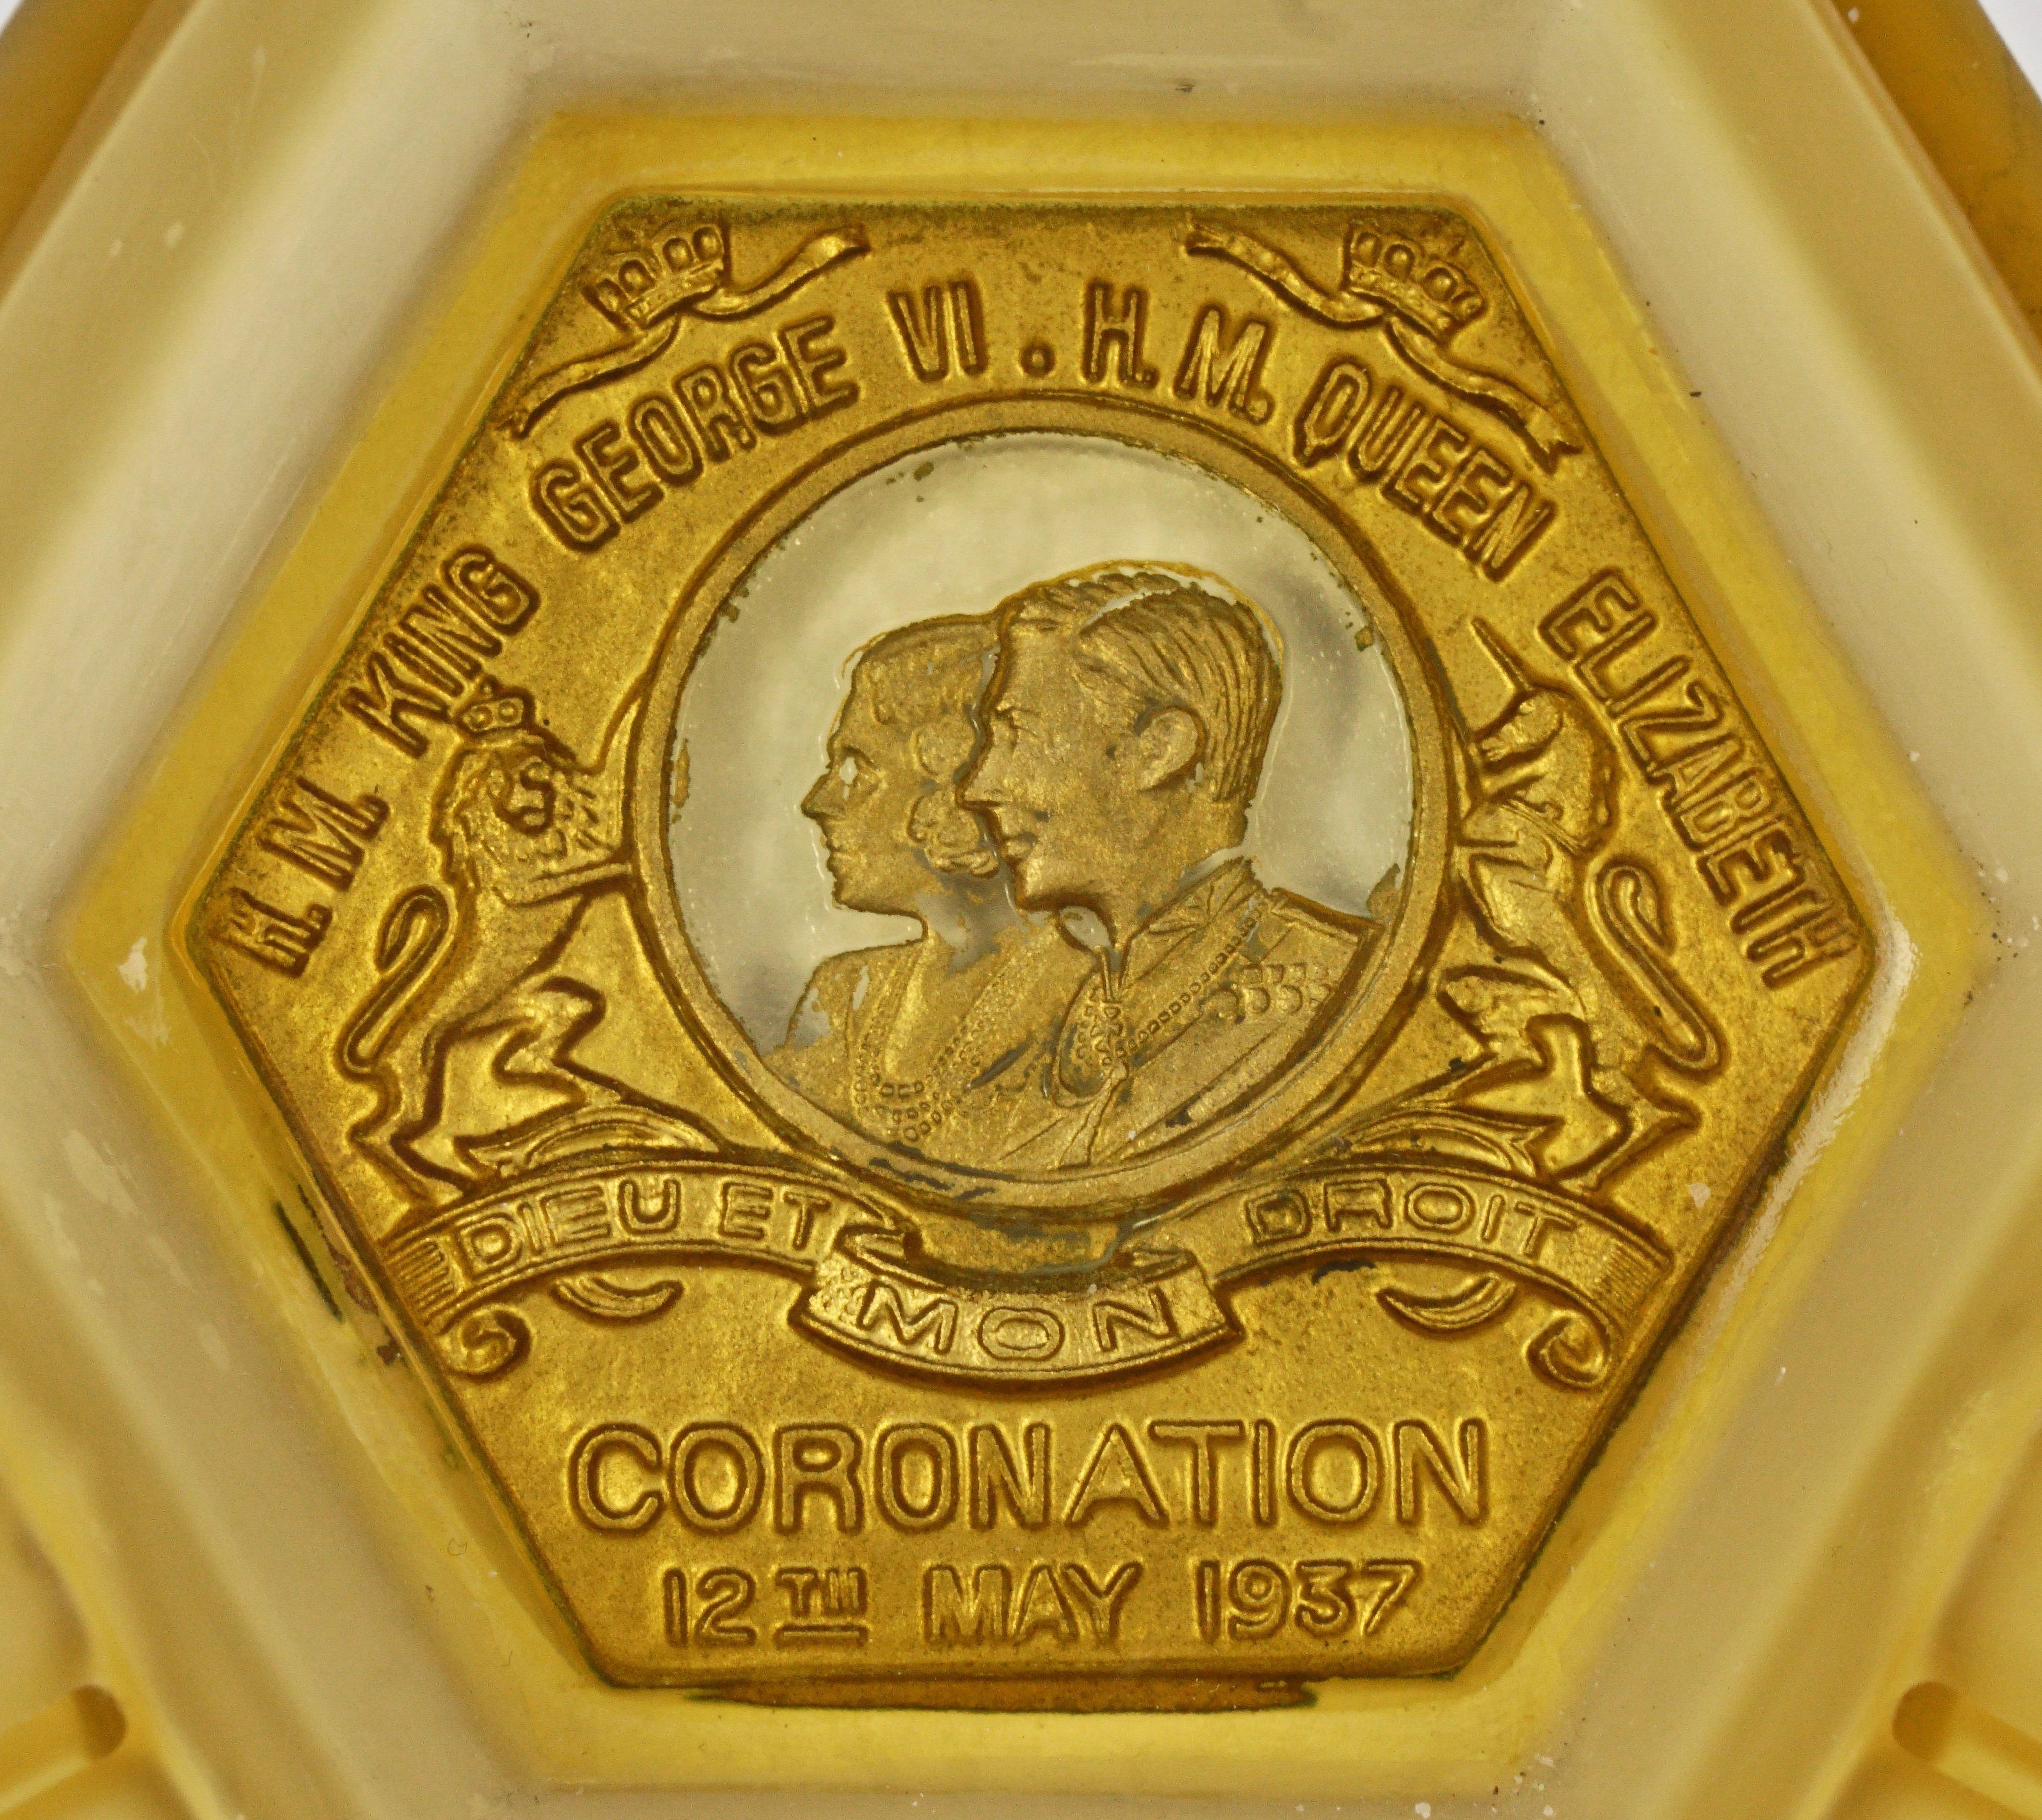 Frosted amber glass ashtray to commemorate the Coronation of King George VI and Queen Elizabeth, 12th May 1937, and featuring a golden embossed design of the King and Queen. The ashtray has a classic Art Deco shape, and has grooves for cigarettes